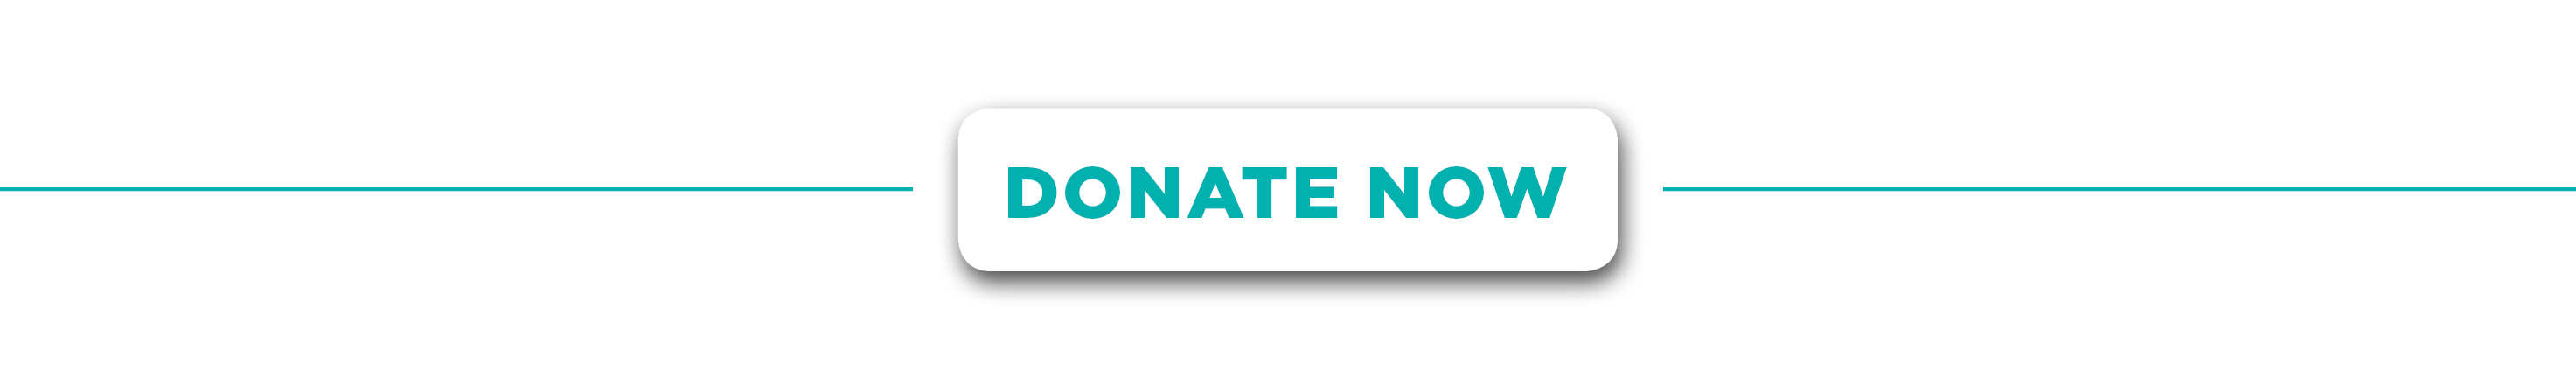 Donate Now to Mount Sinai Hospital Foundation and support Dr. Paul Walfish's work